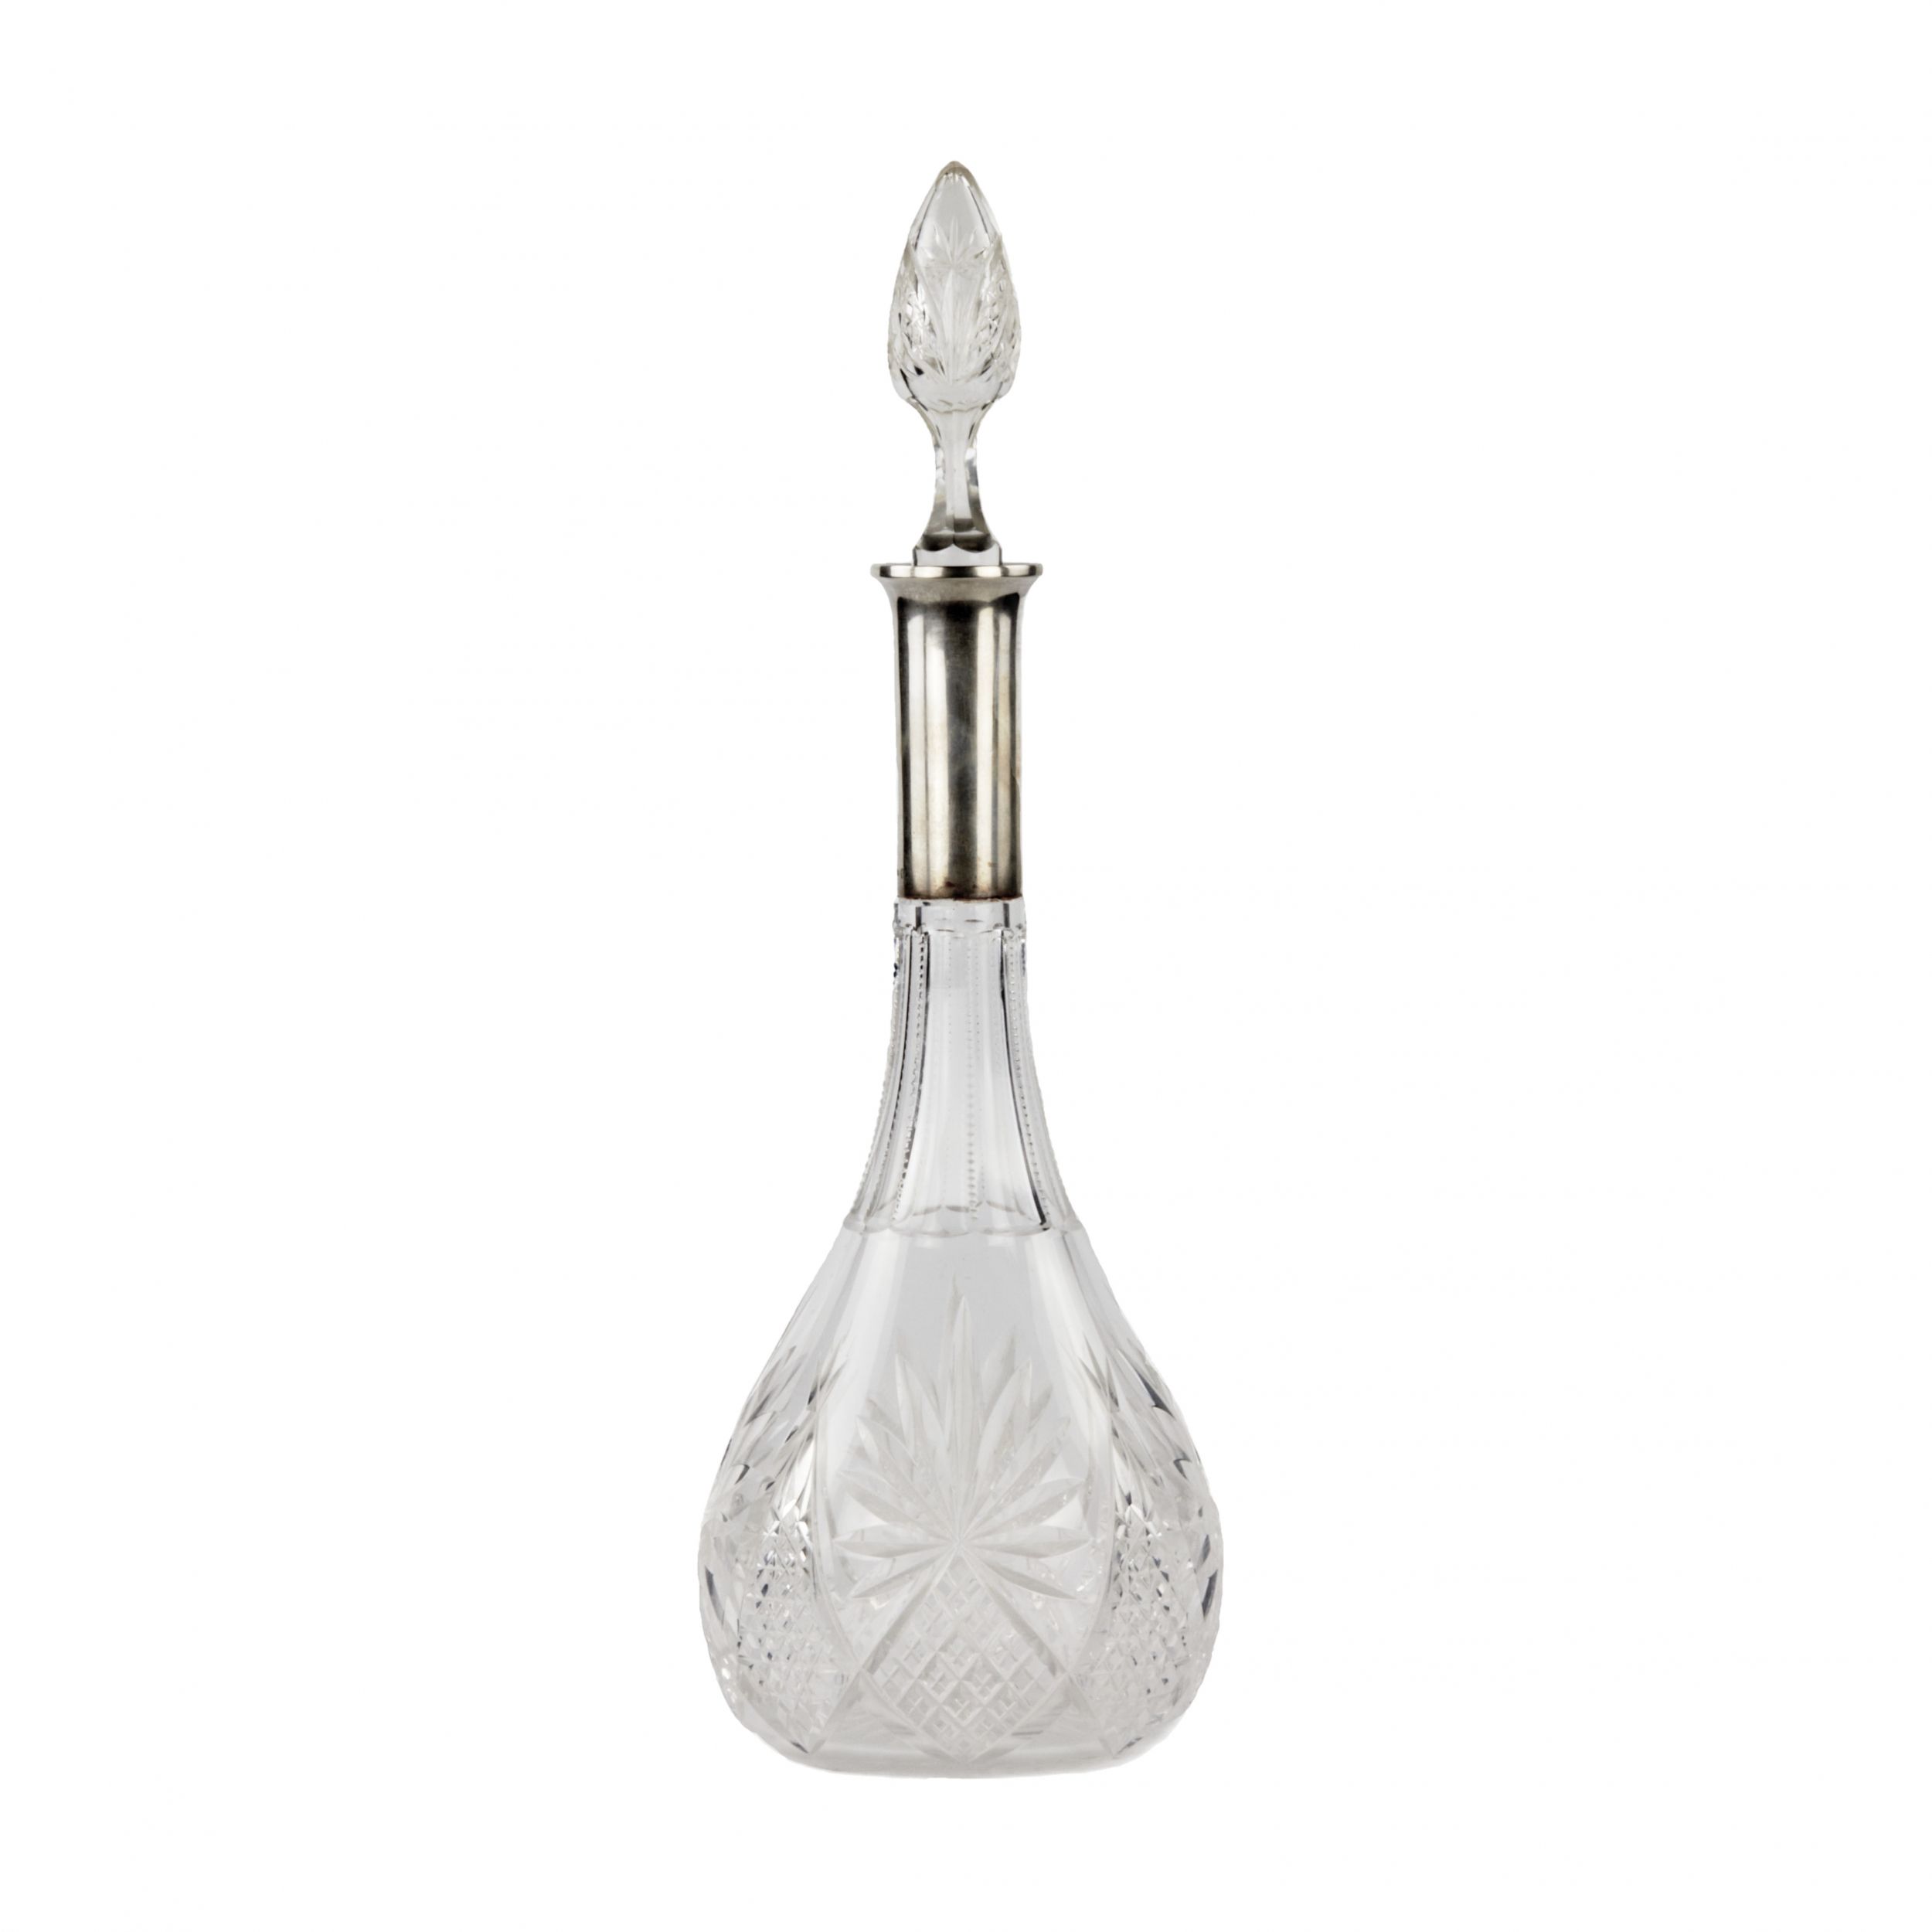 Crystal-decanter-with-a-silver-neck-